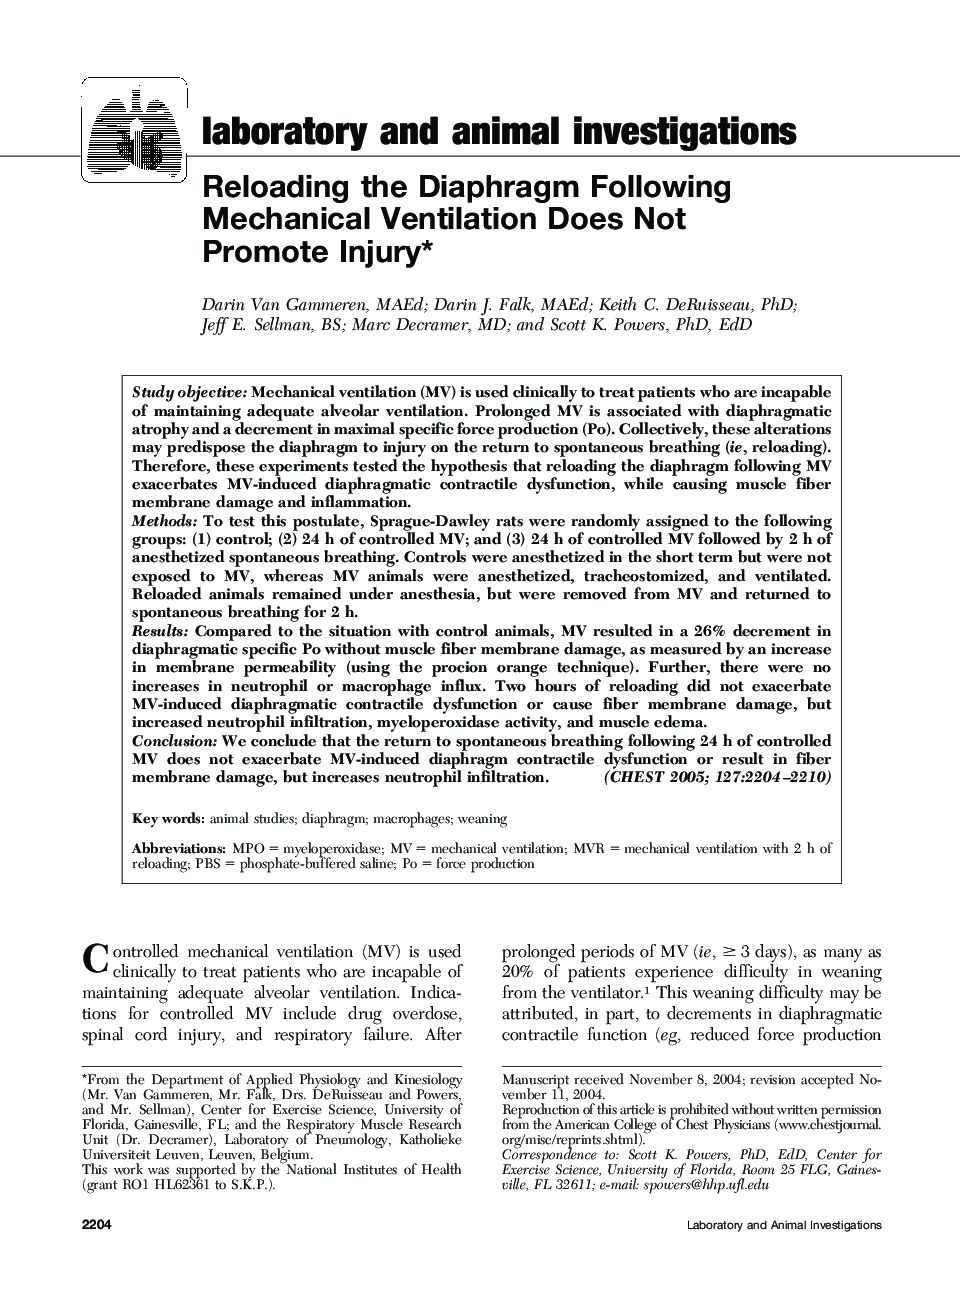 Reloading the Diaphragm Following Mechanical Ventilation Does Not Promote Injury 